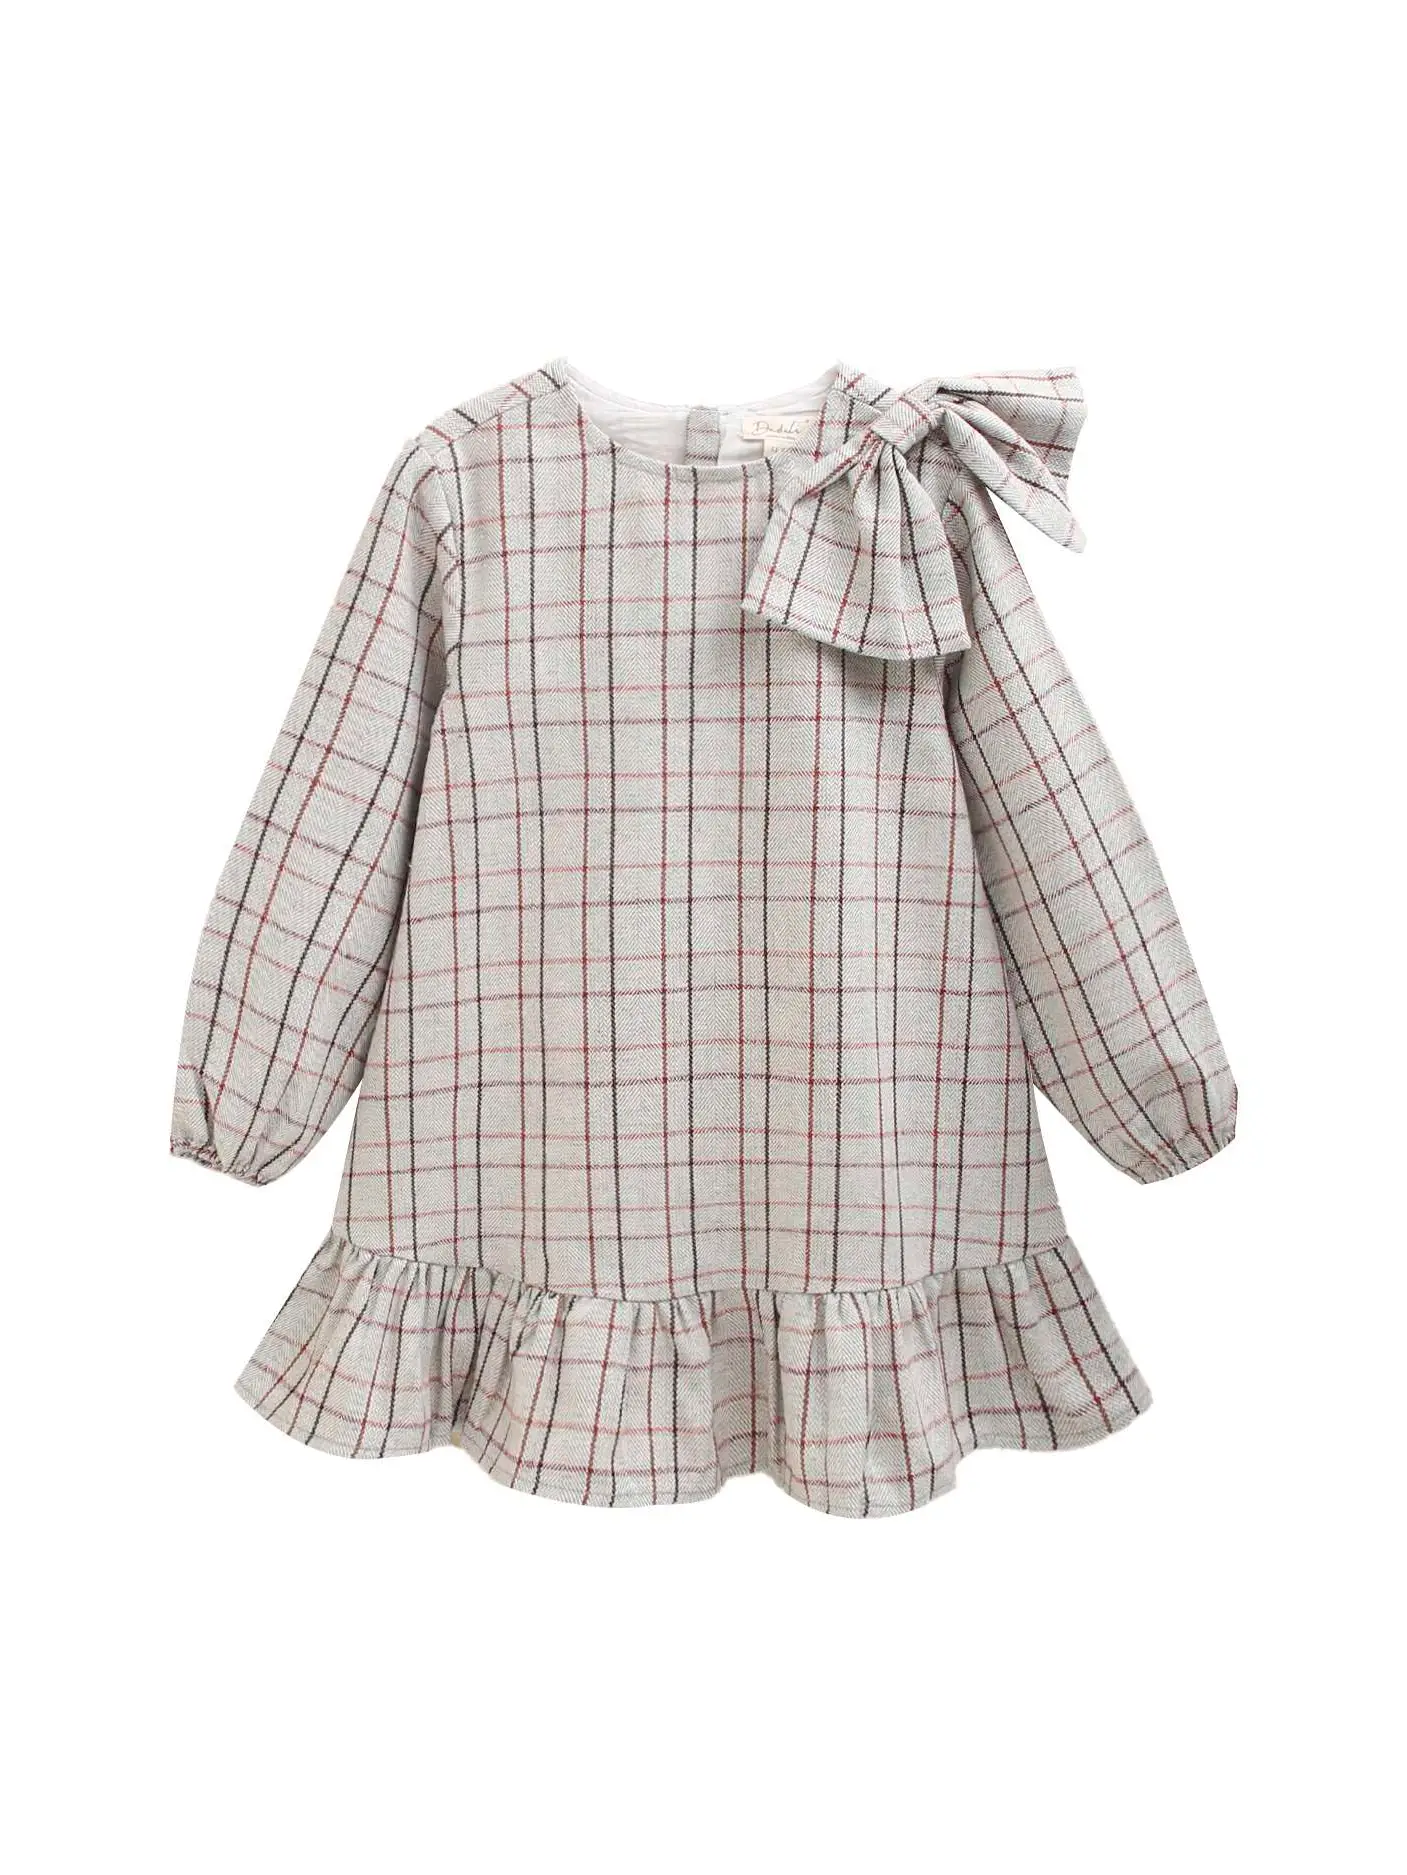 Gray Girl's Dress with Red, Maroon and Brown Checkered